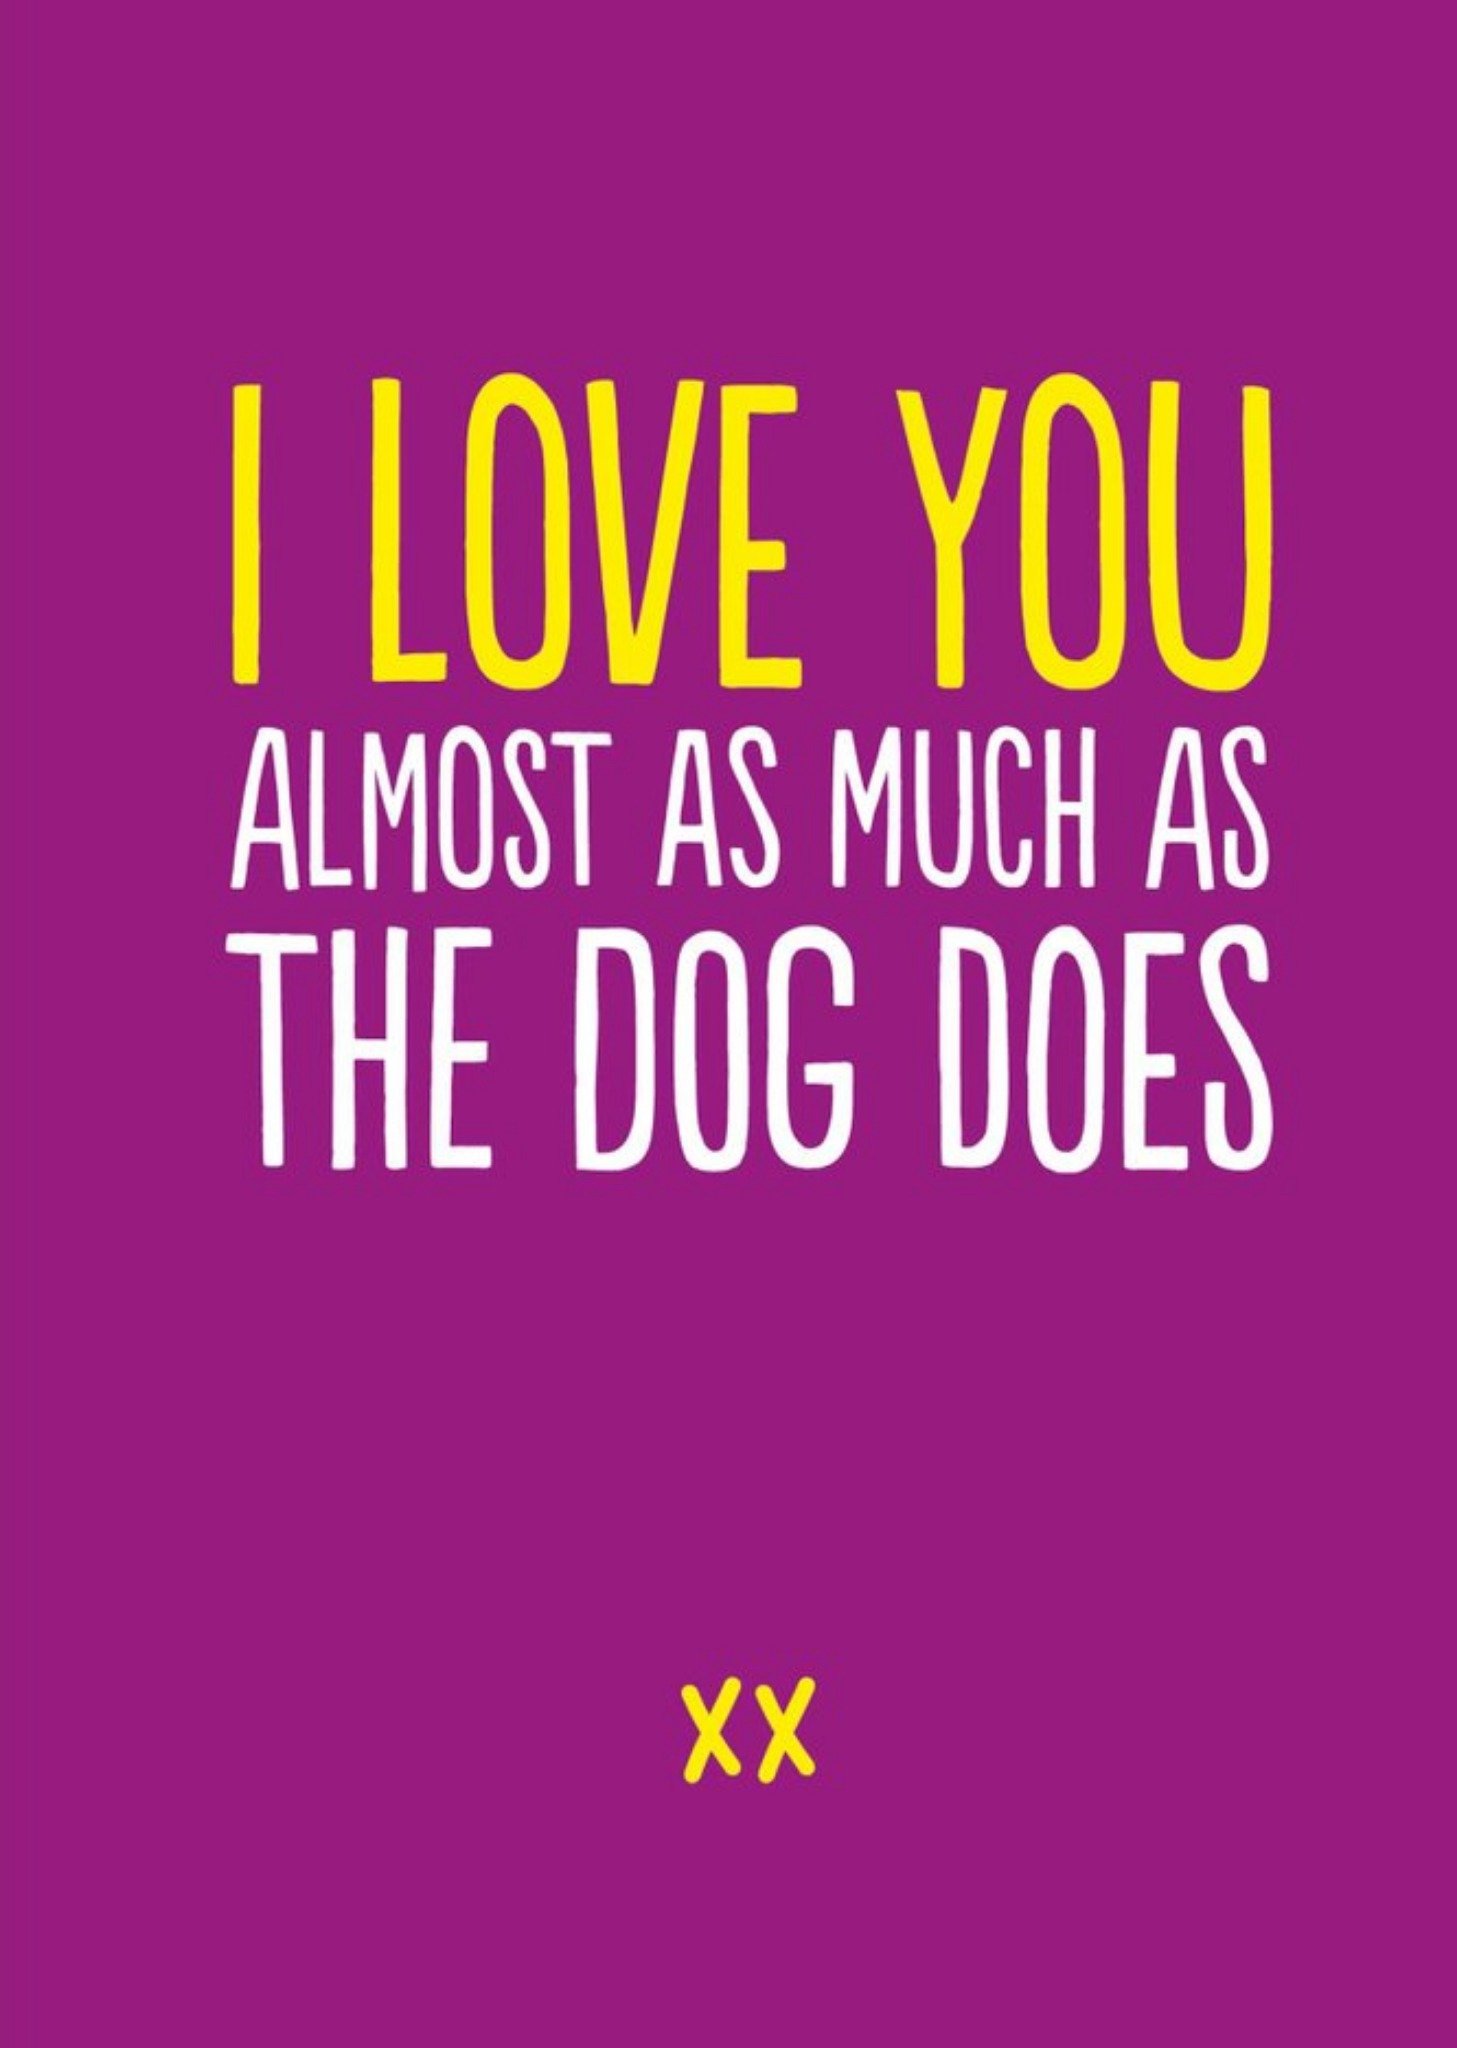 Moonpig Humourous Typography On A Vibrant Purple Background Valentines Day Card Ecard